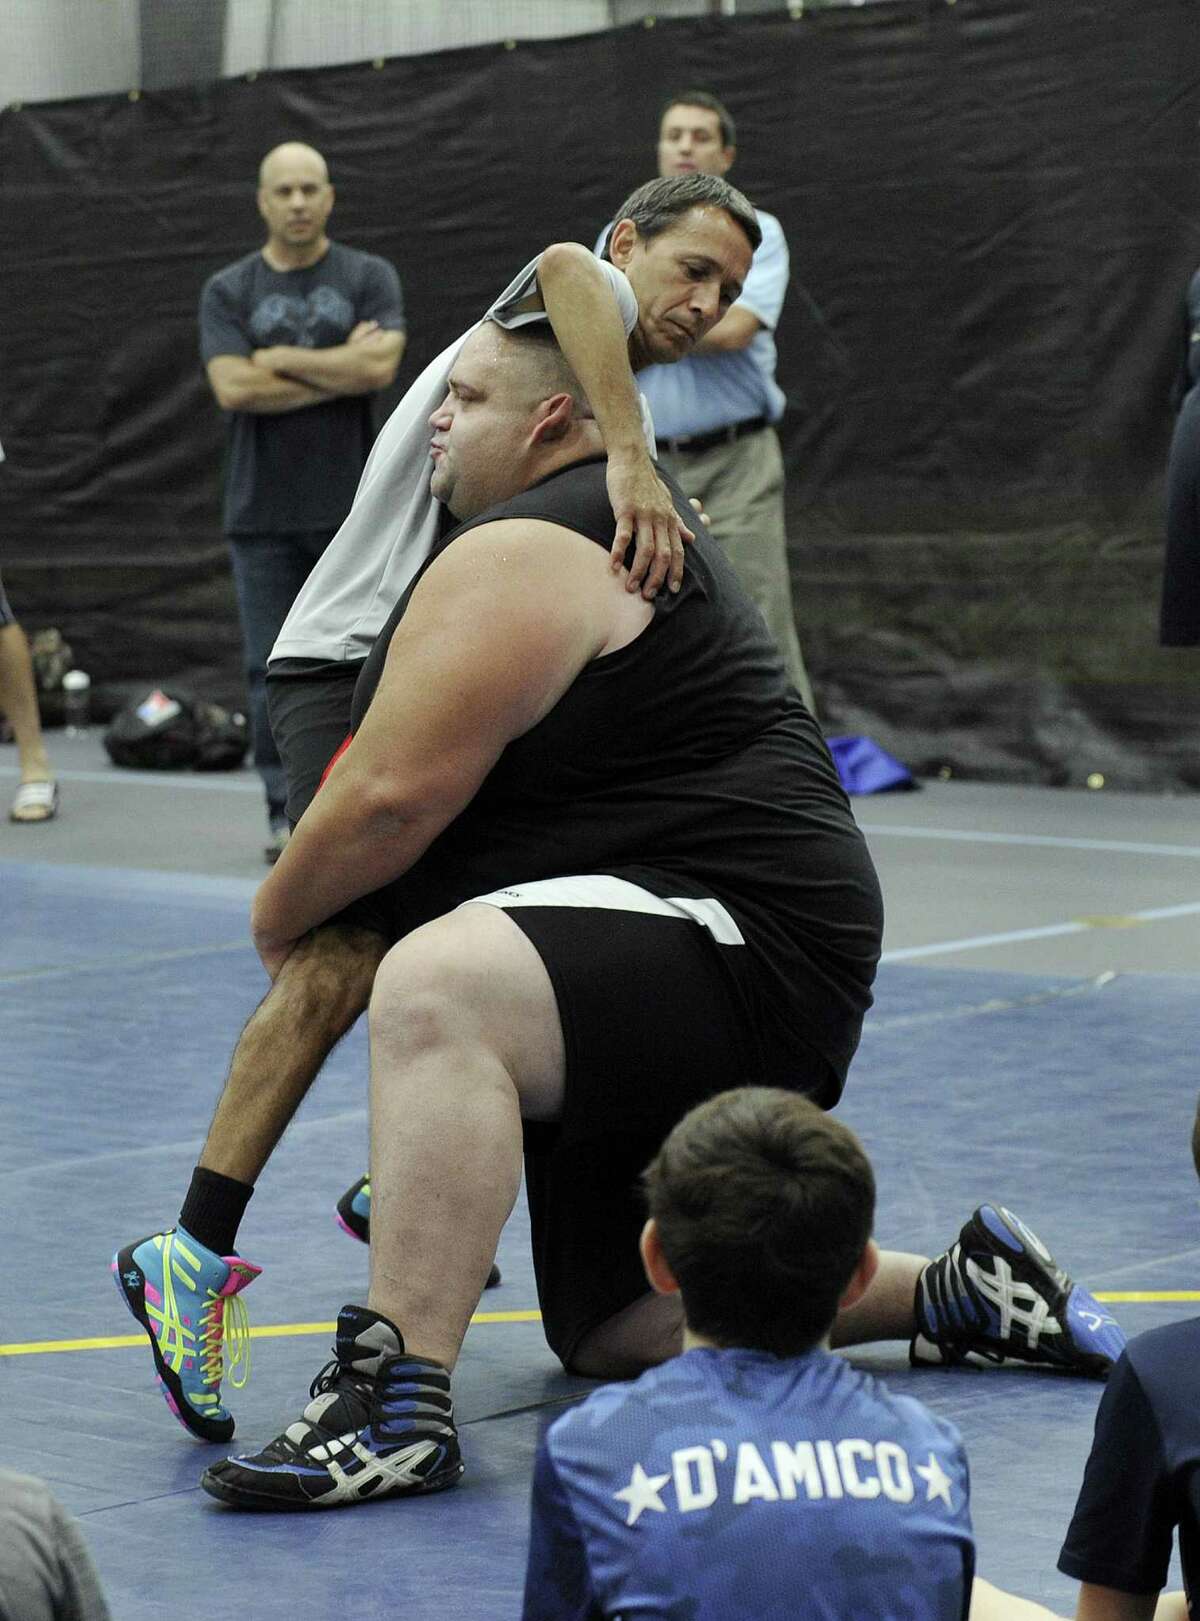 Rulon Gardner, a U.S. Olympic wrestler who won a gold medal in 2000, demonstrates technique with Curtis Urbina, coach for the Newtown Youth Wrestling Assoc. Wednesday, August 17, 2016. Gardner worked with kids at the Newtown Youth Wrestling summer camp at the Newtown Youth Academy Wednesday.